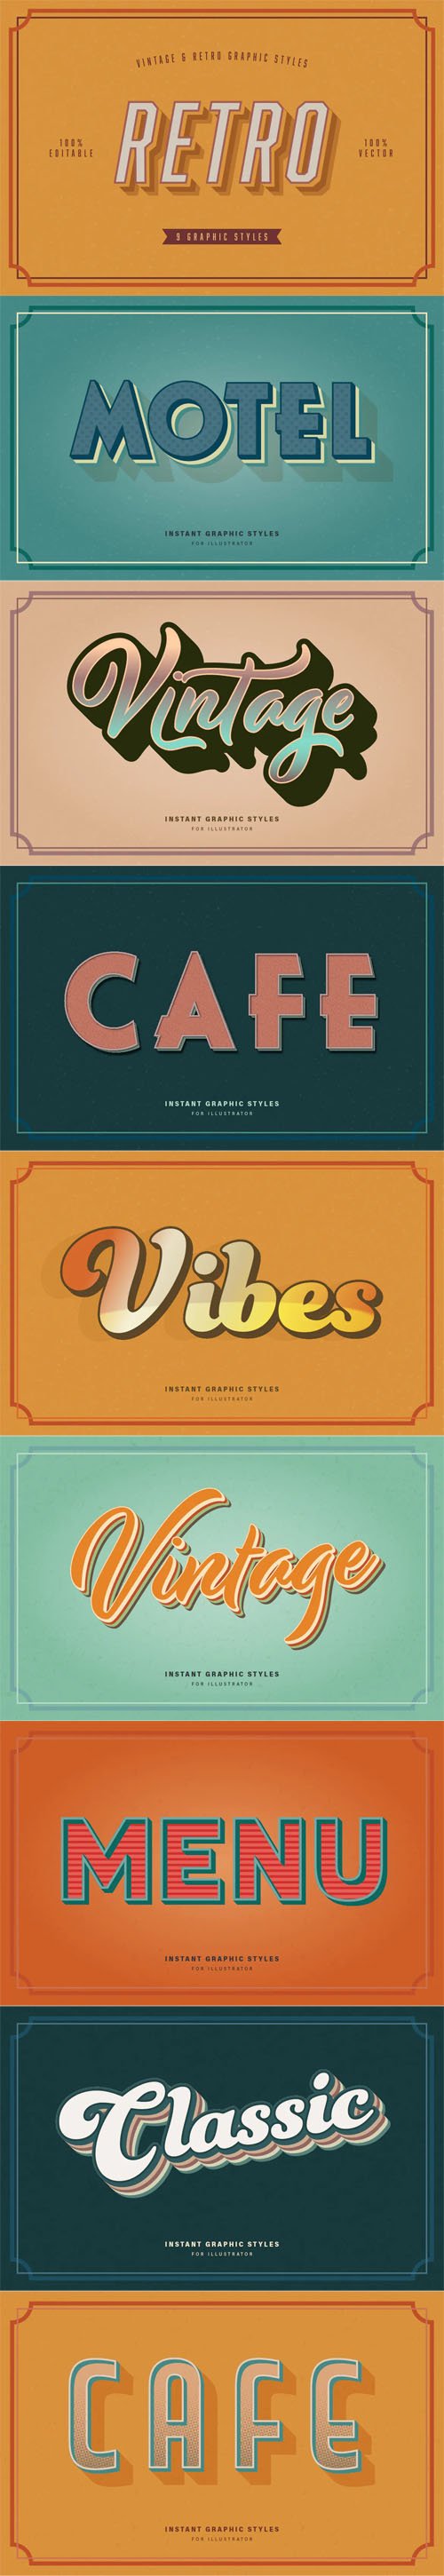 9 Vintage and Retro Graphic Styles for Adobe Illustrator